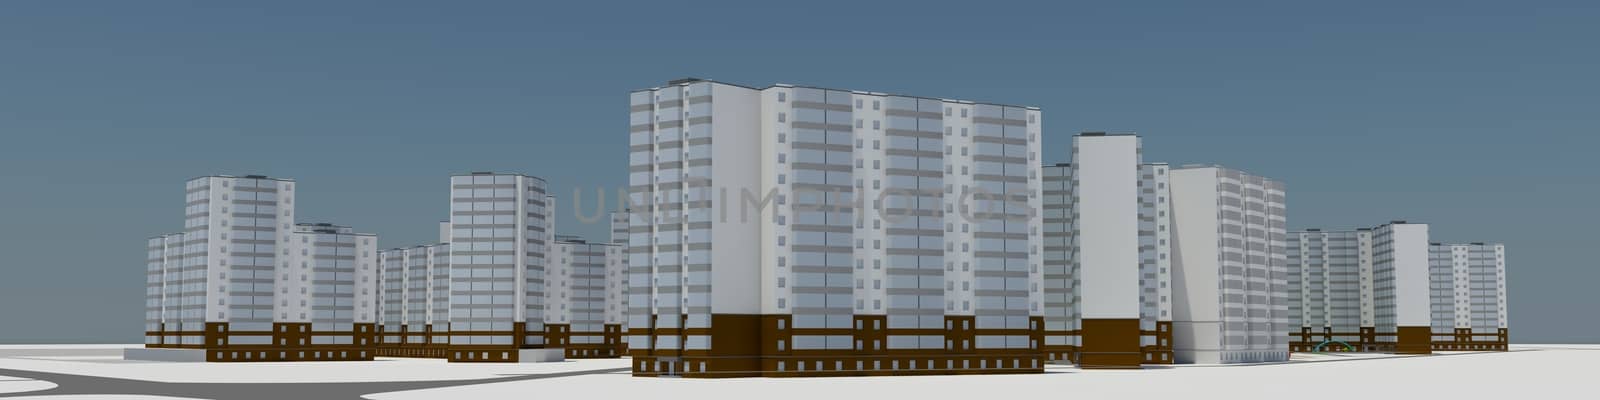 Residential district. 3d rendering on blue sky background